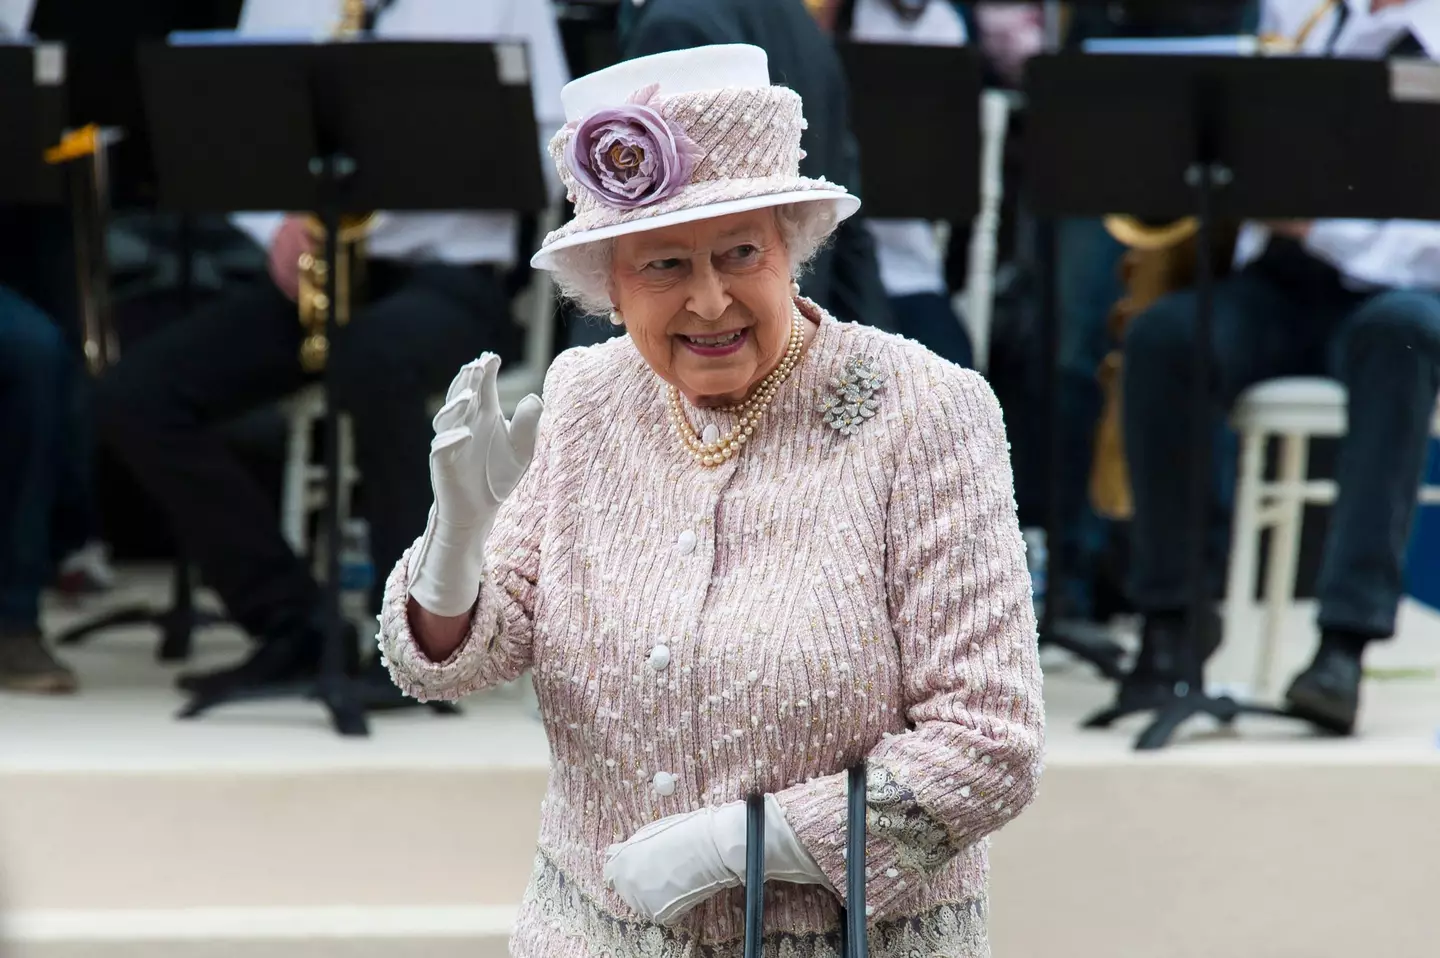 According to a TikTok 'time traveller', Queen Elizabeth's days are numbered.